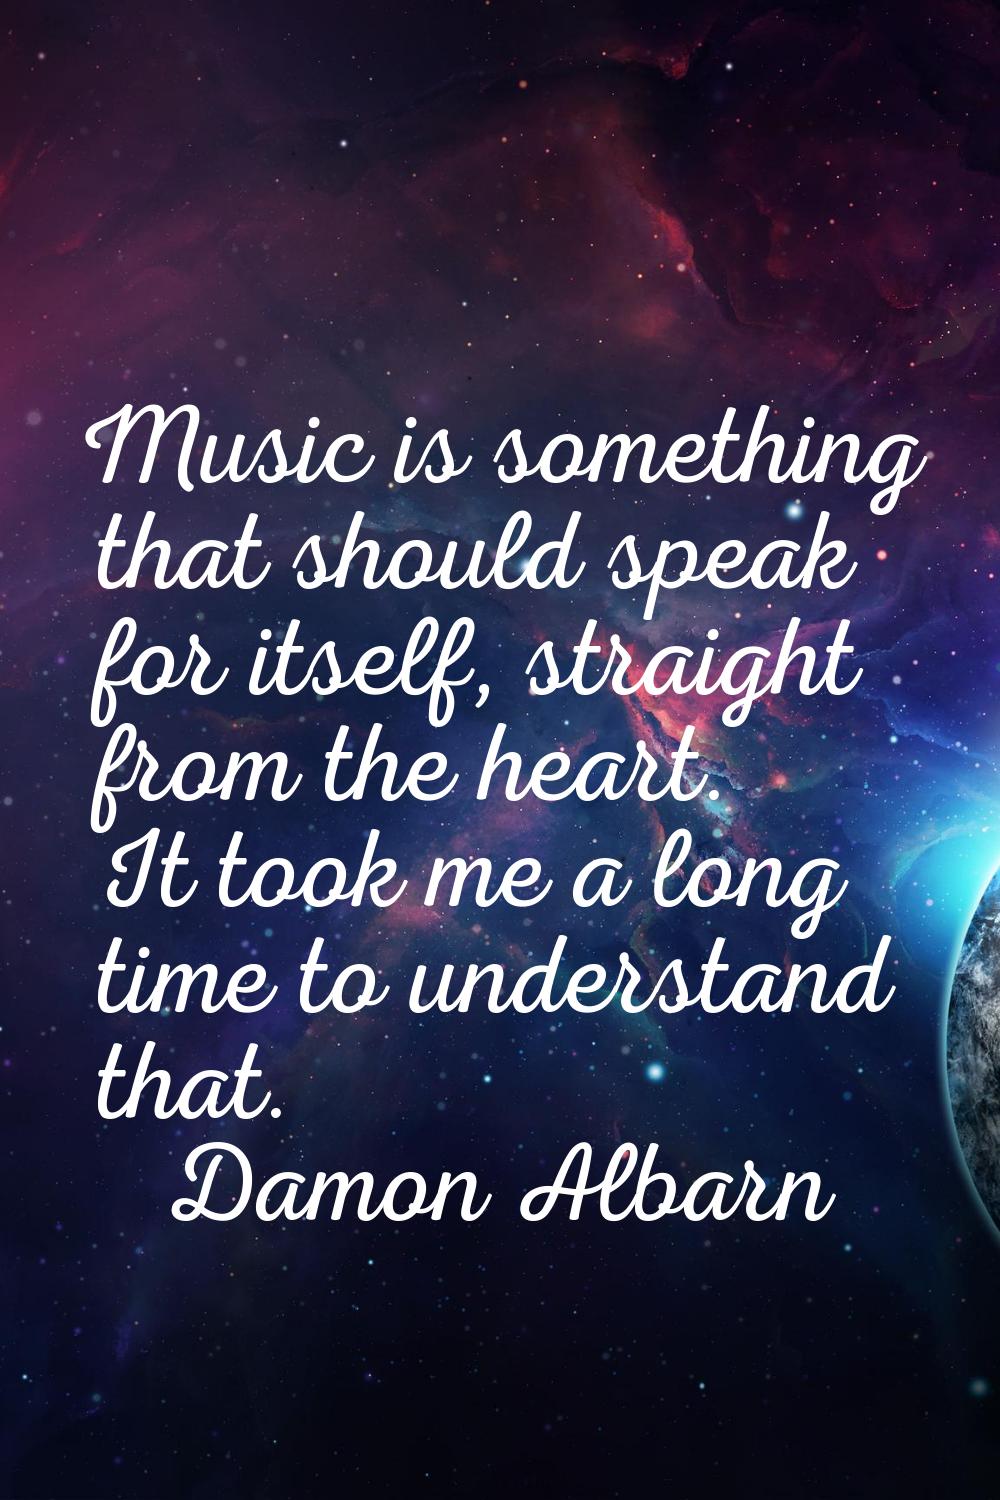 Music is something that should speak for itself, straight from the heart. It took me a long time to